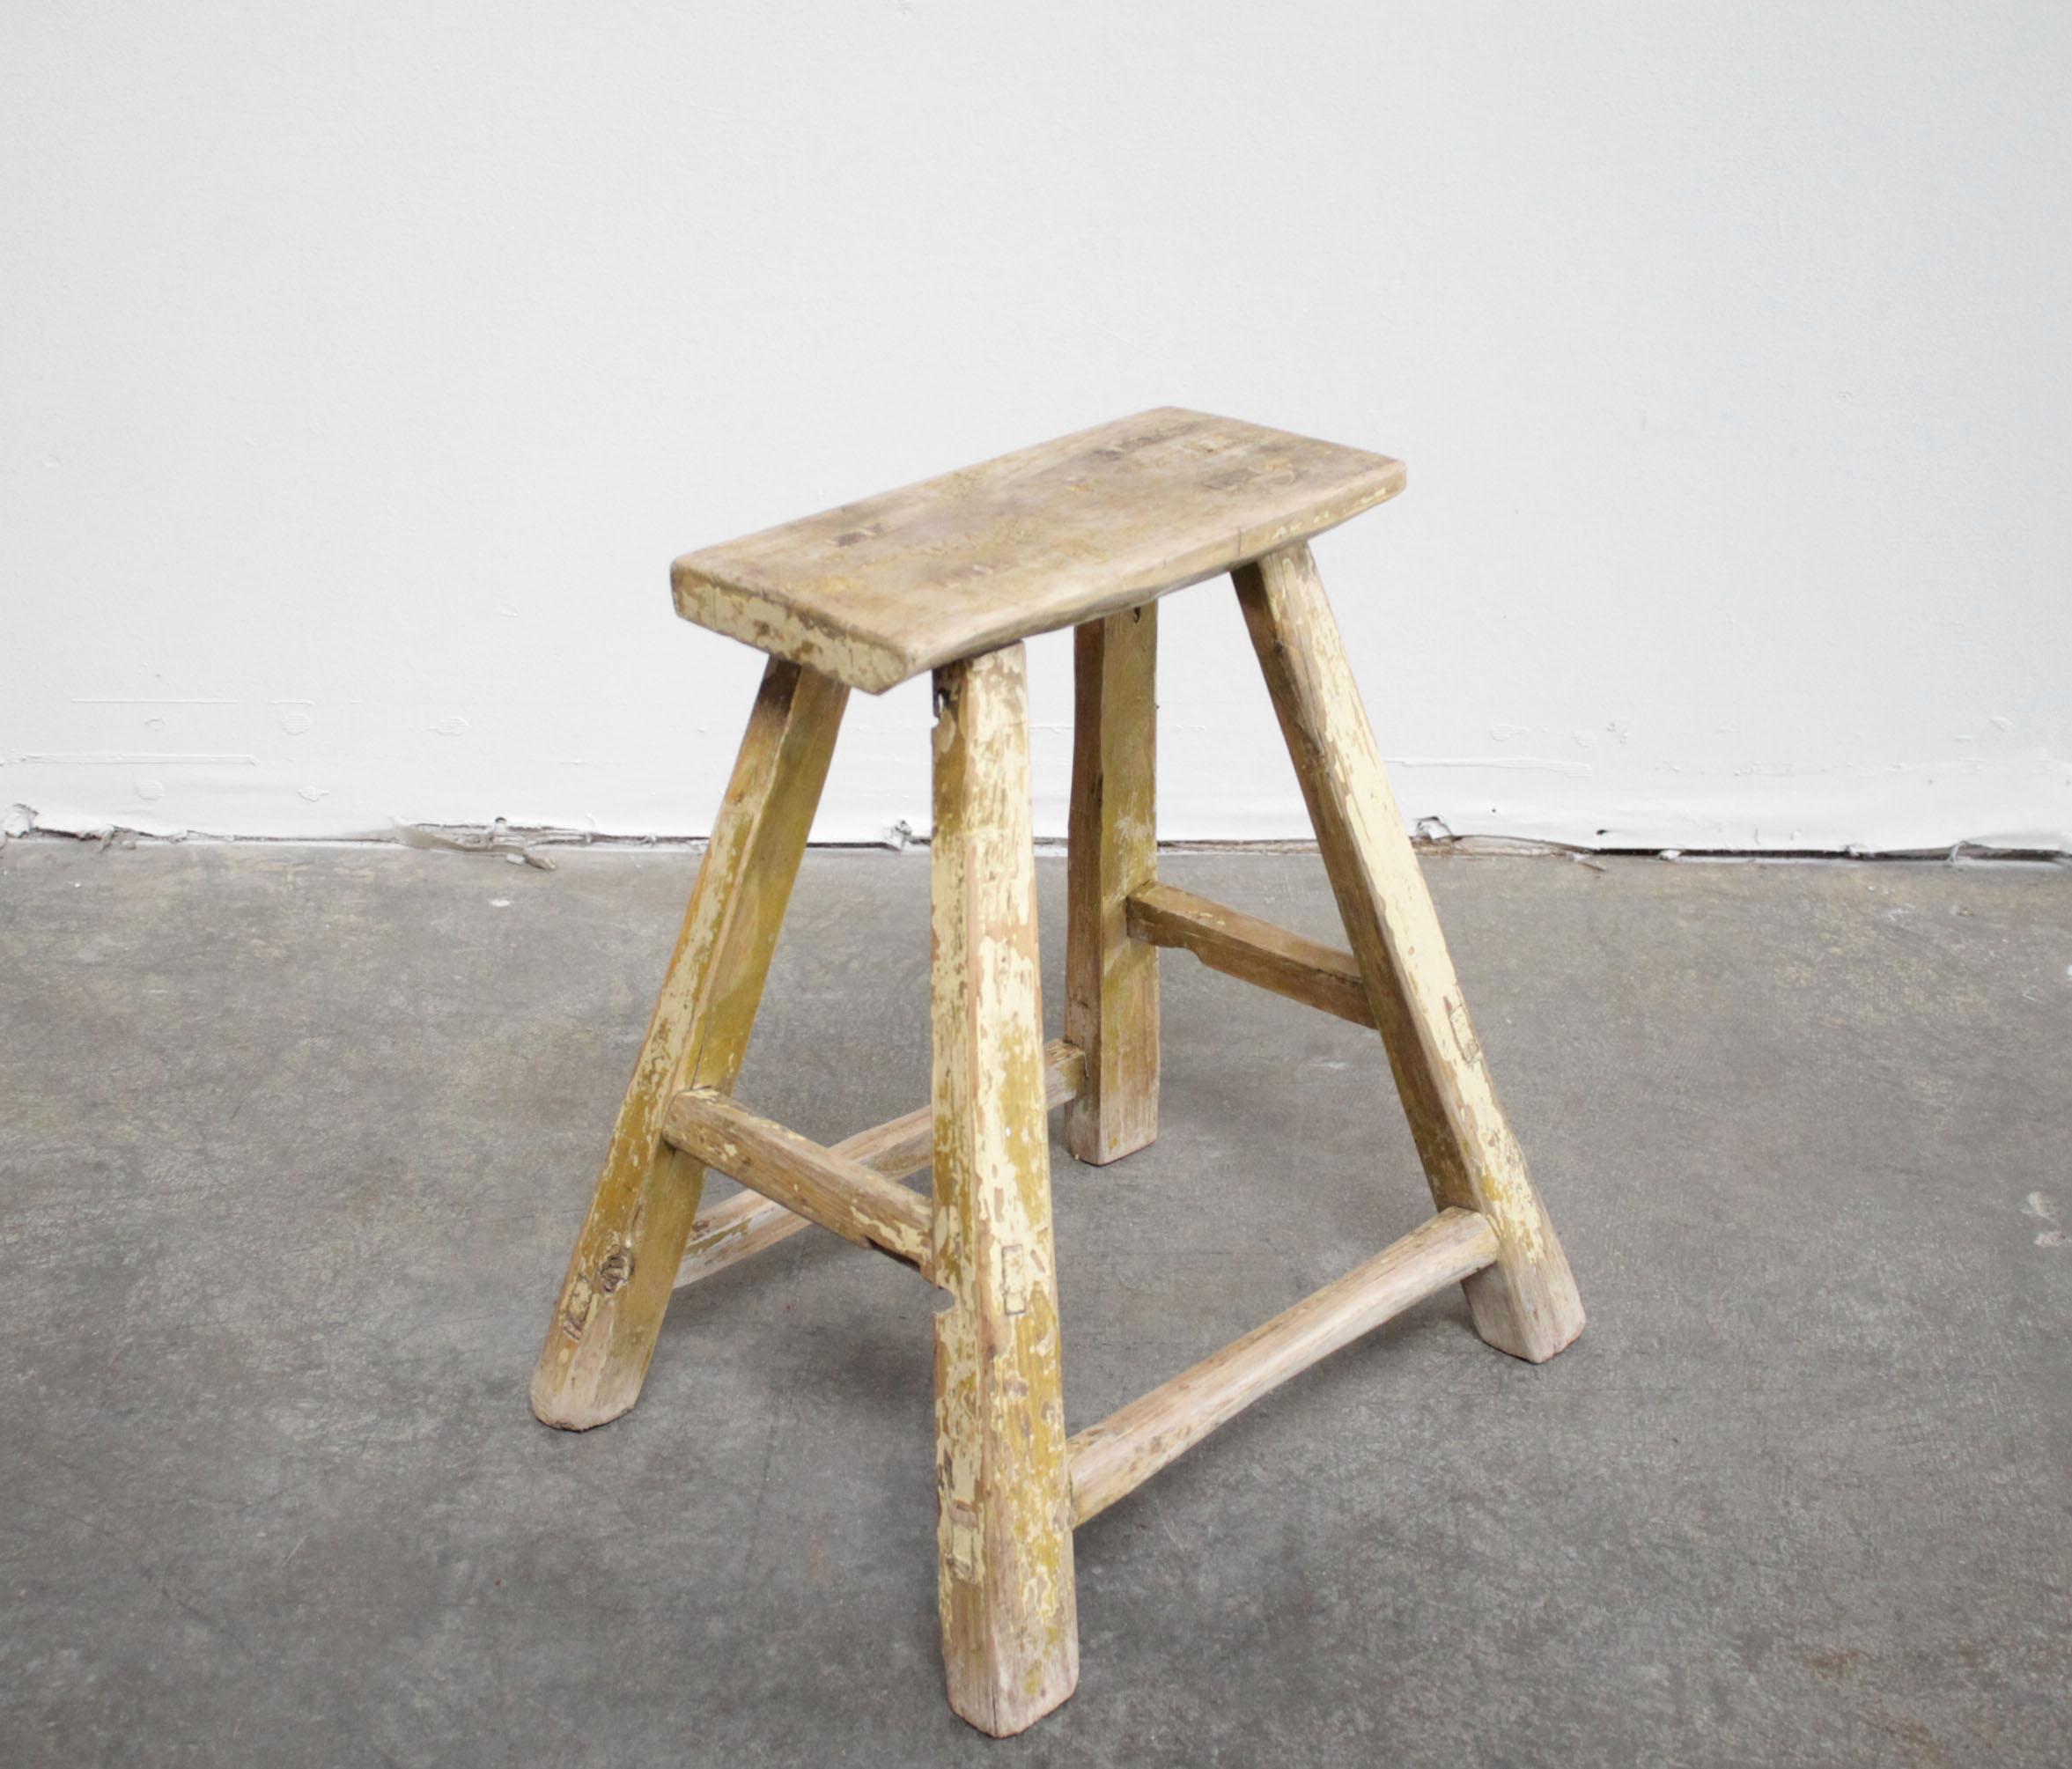 Vintage antique elmwood stool
These are the real vintage antique elmwood stools! Beautiful antique patina, with weathering and age, these are solid and sturdy ready for daily use, use as a table, stool, drink table, they are great for any space.